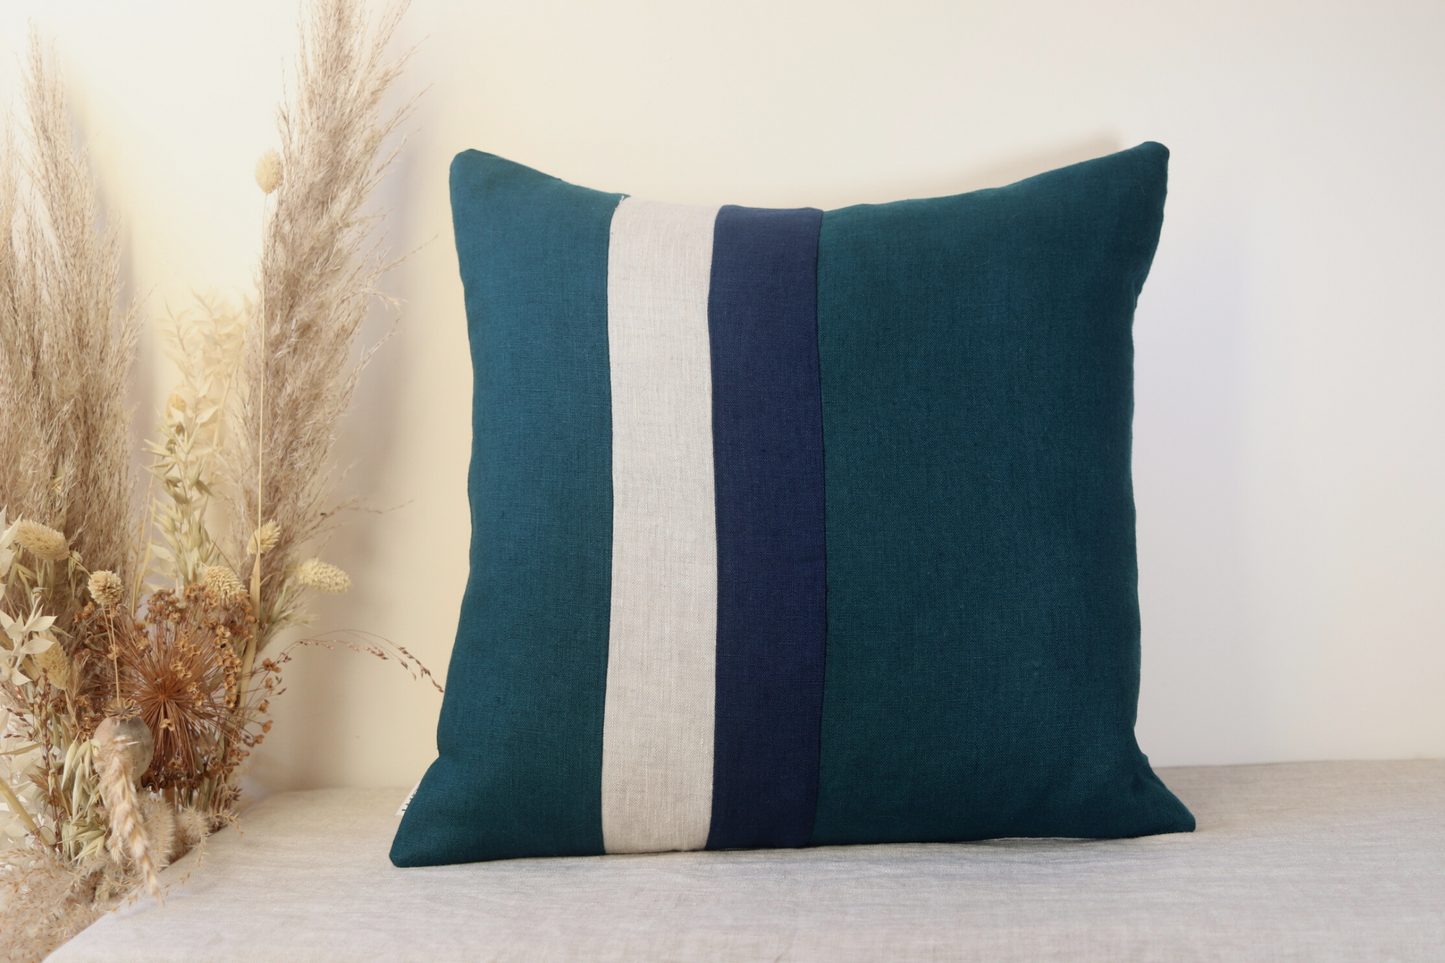 Cushion with stripes of marine blue, natural linen and navy blue